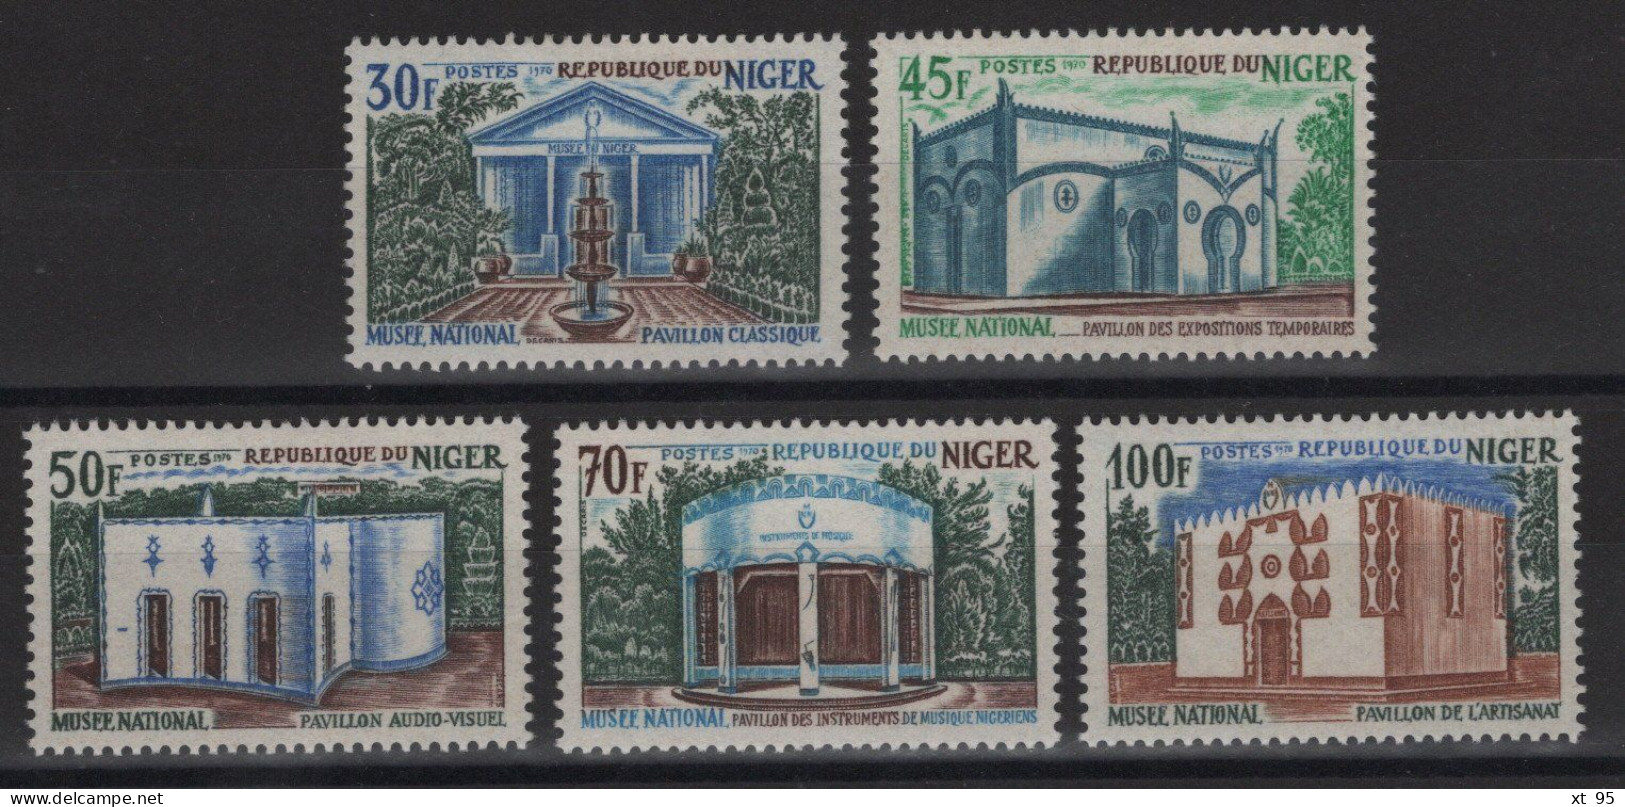 Niger - N°227 à 231 - Musee National - * Neufs Avec Trace Charniere - Cote 6€ - Niger (1960-...)